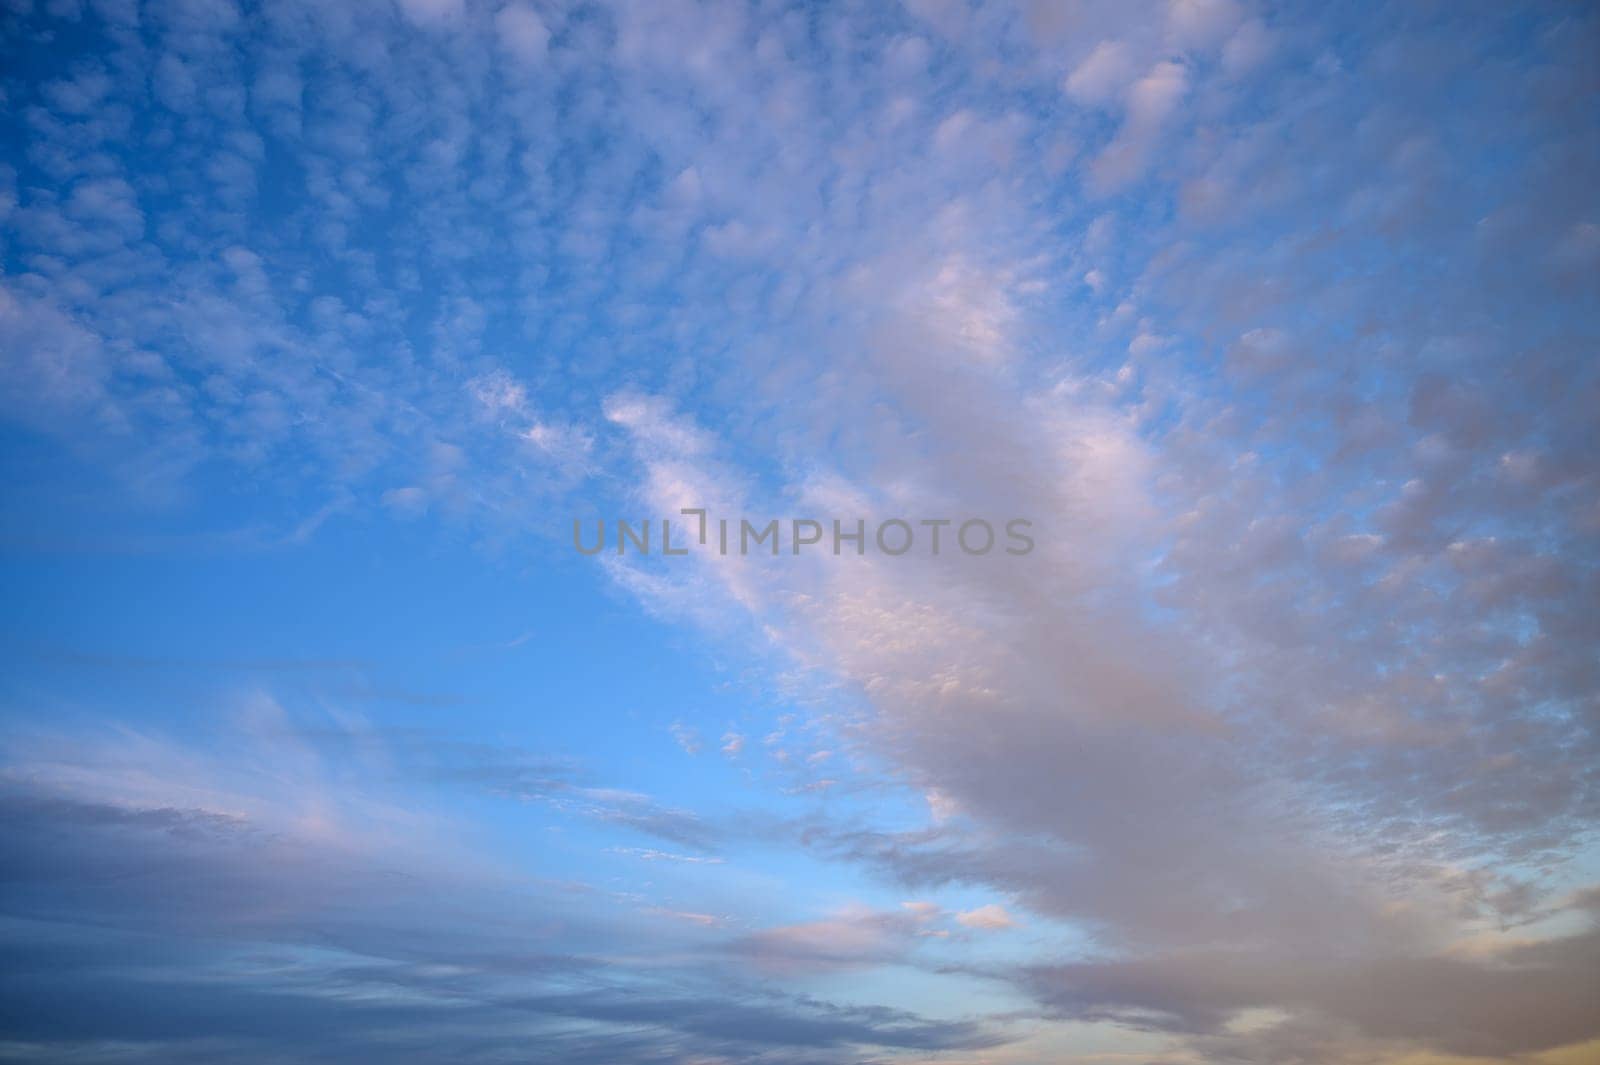 sunset sky on the island of Cyprus, colorful clouds and reflections in the sky 8